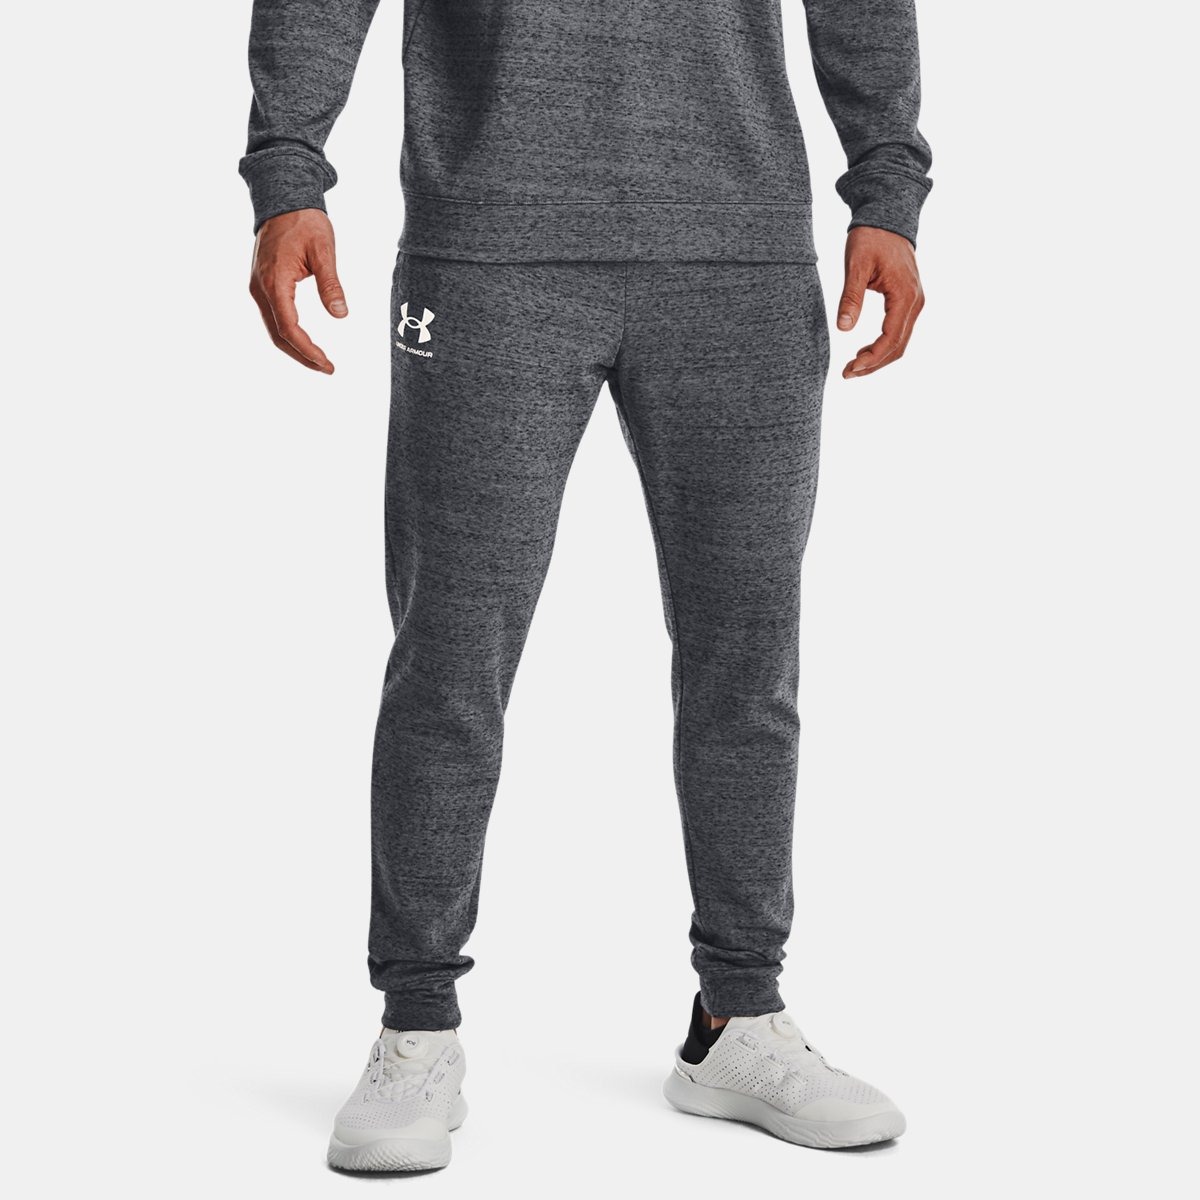 Gent Grey Joggers at Under Armour GOOFASH